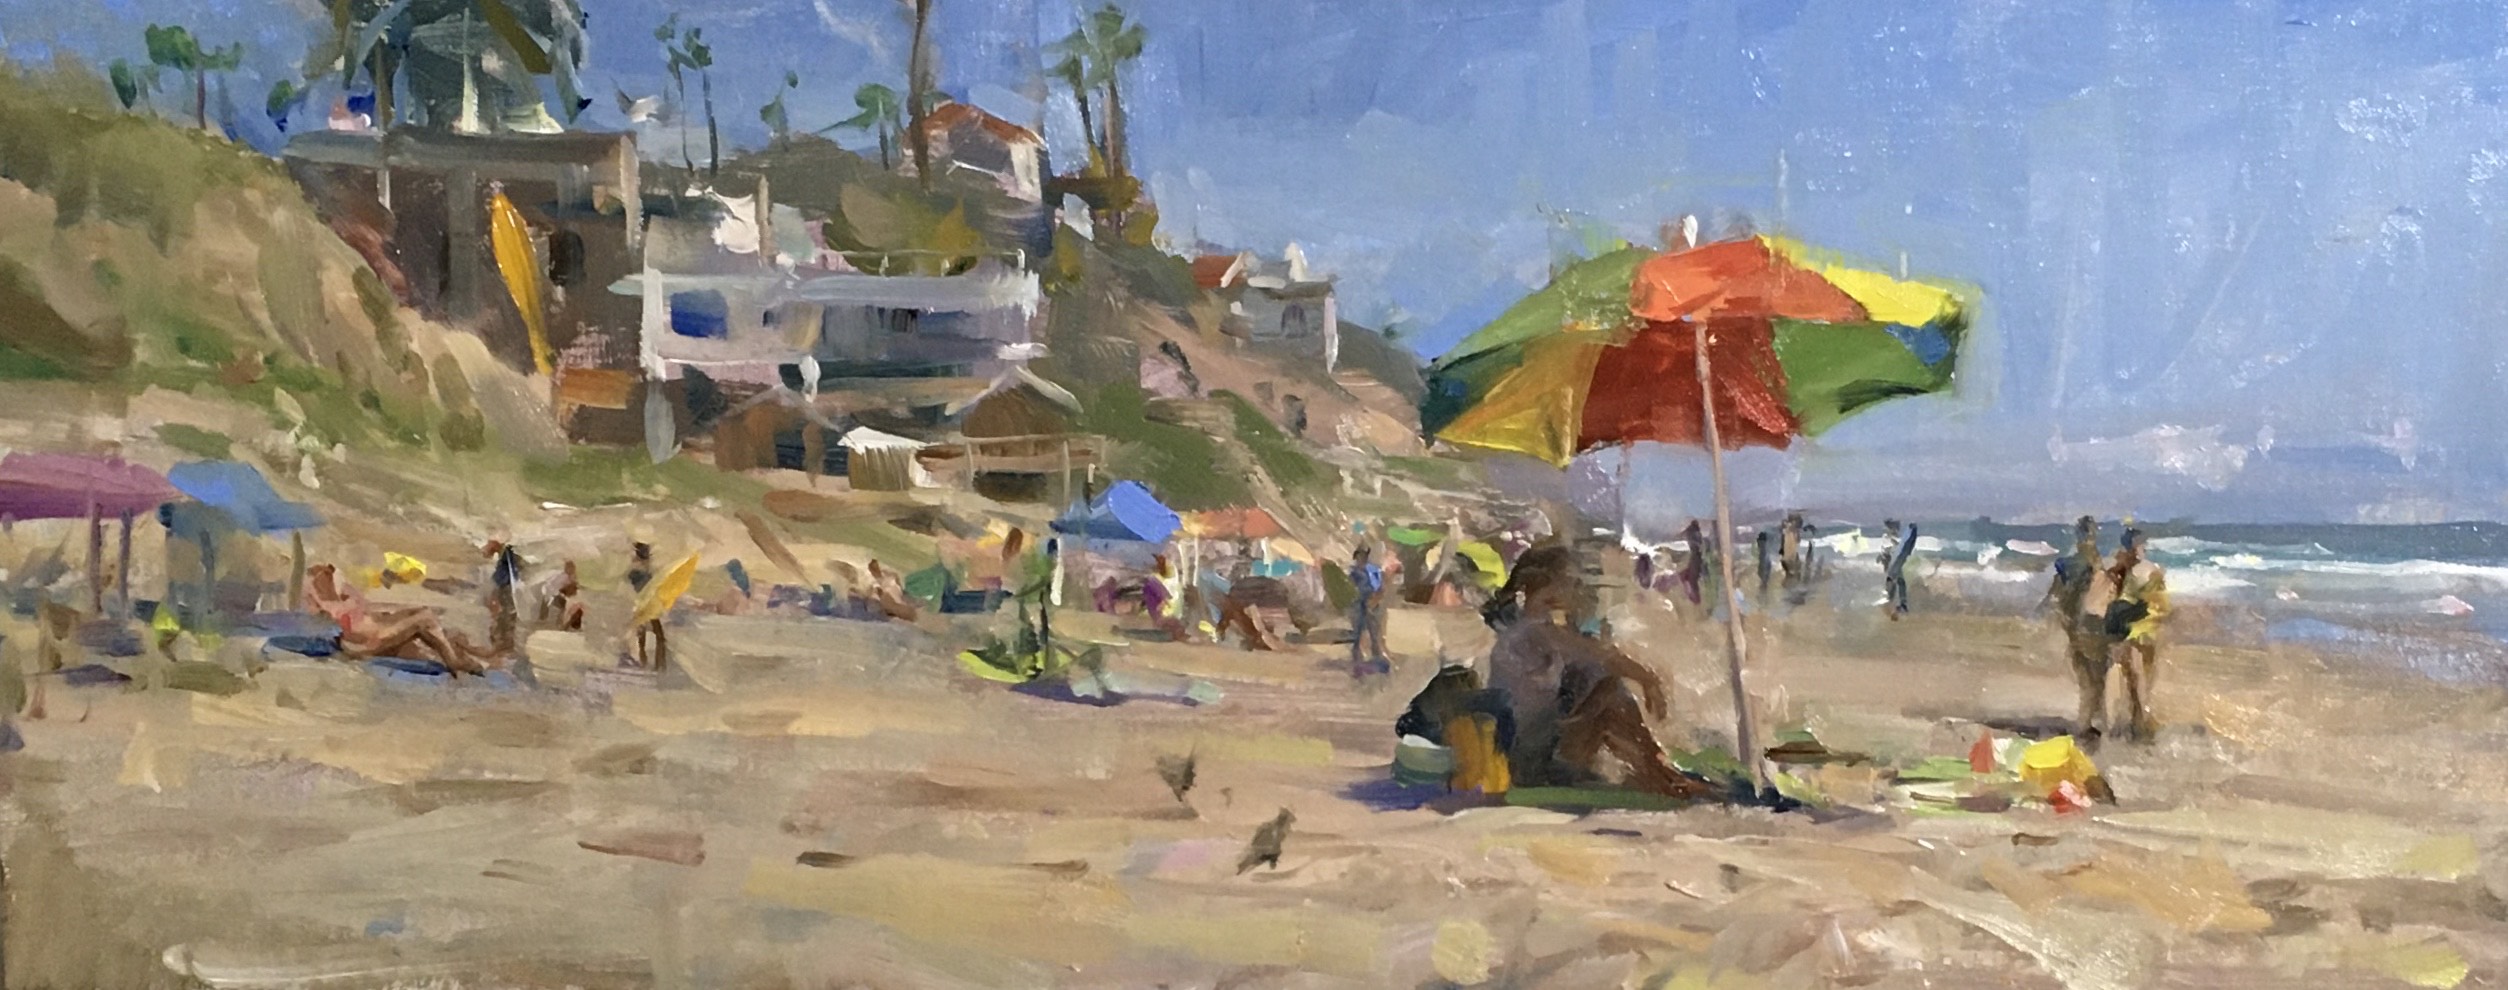 Moonlight State Beach Art Piece available at Hindes Fine Art Gallery